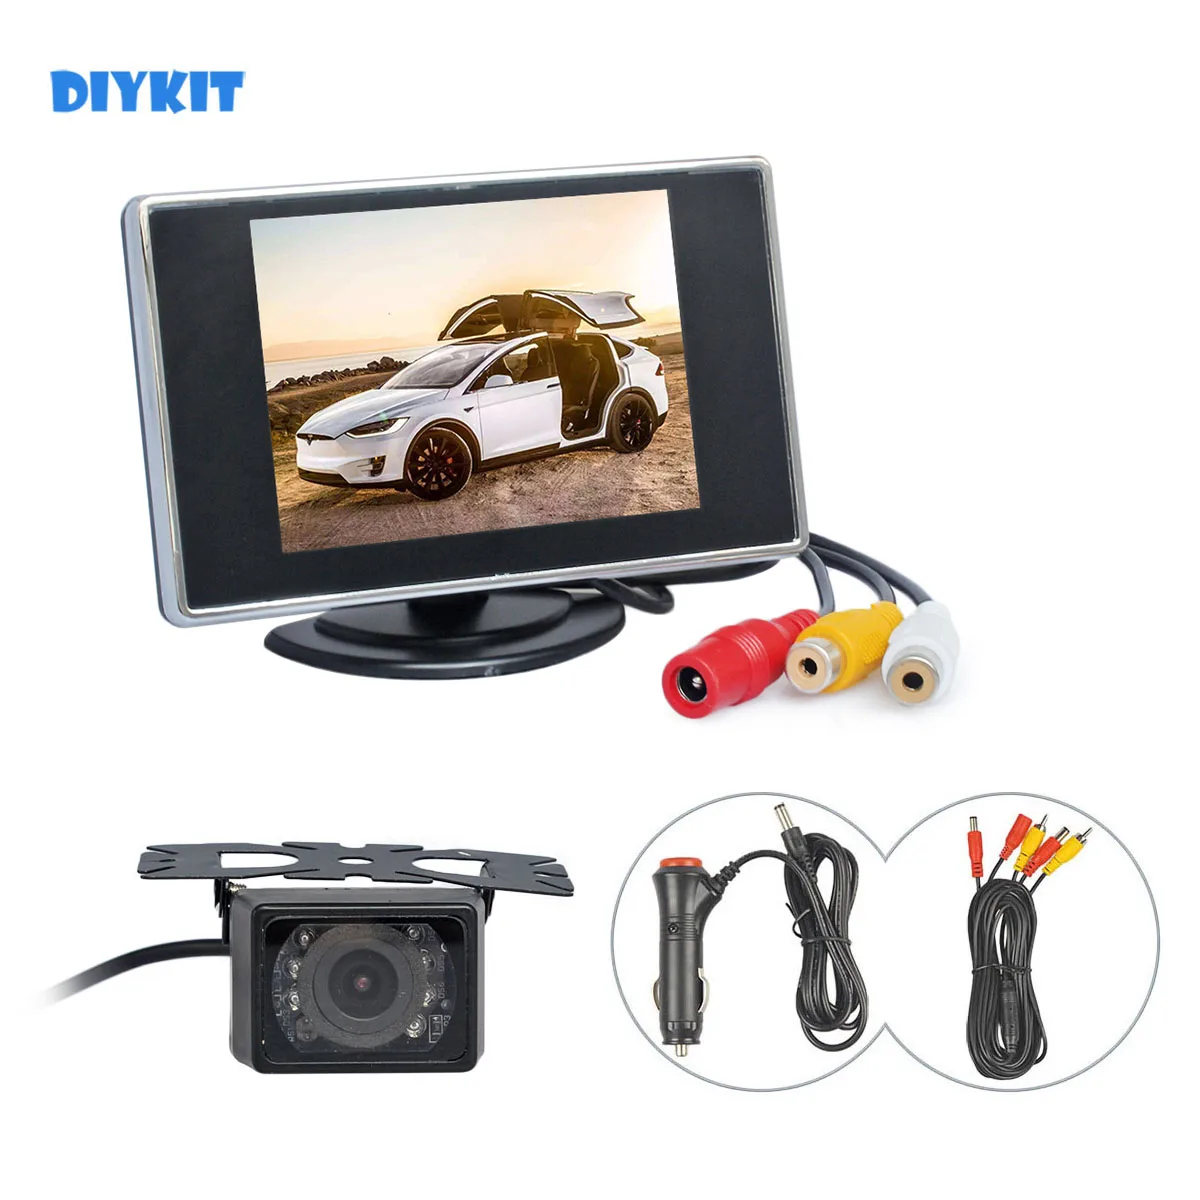 

DIYKIT Wired 3.5inch TFT LCD Backup Car Monitor IR Night Vision Rear View Car Camera Reversing Camera Parking Assistance System